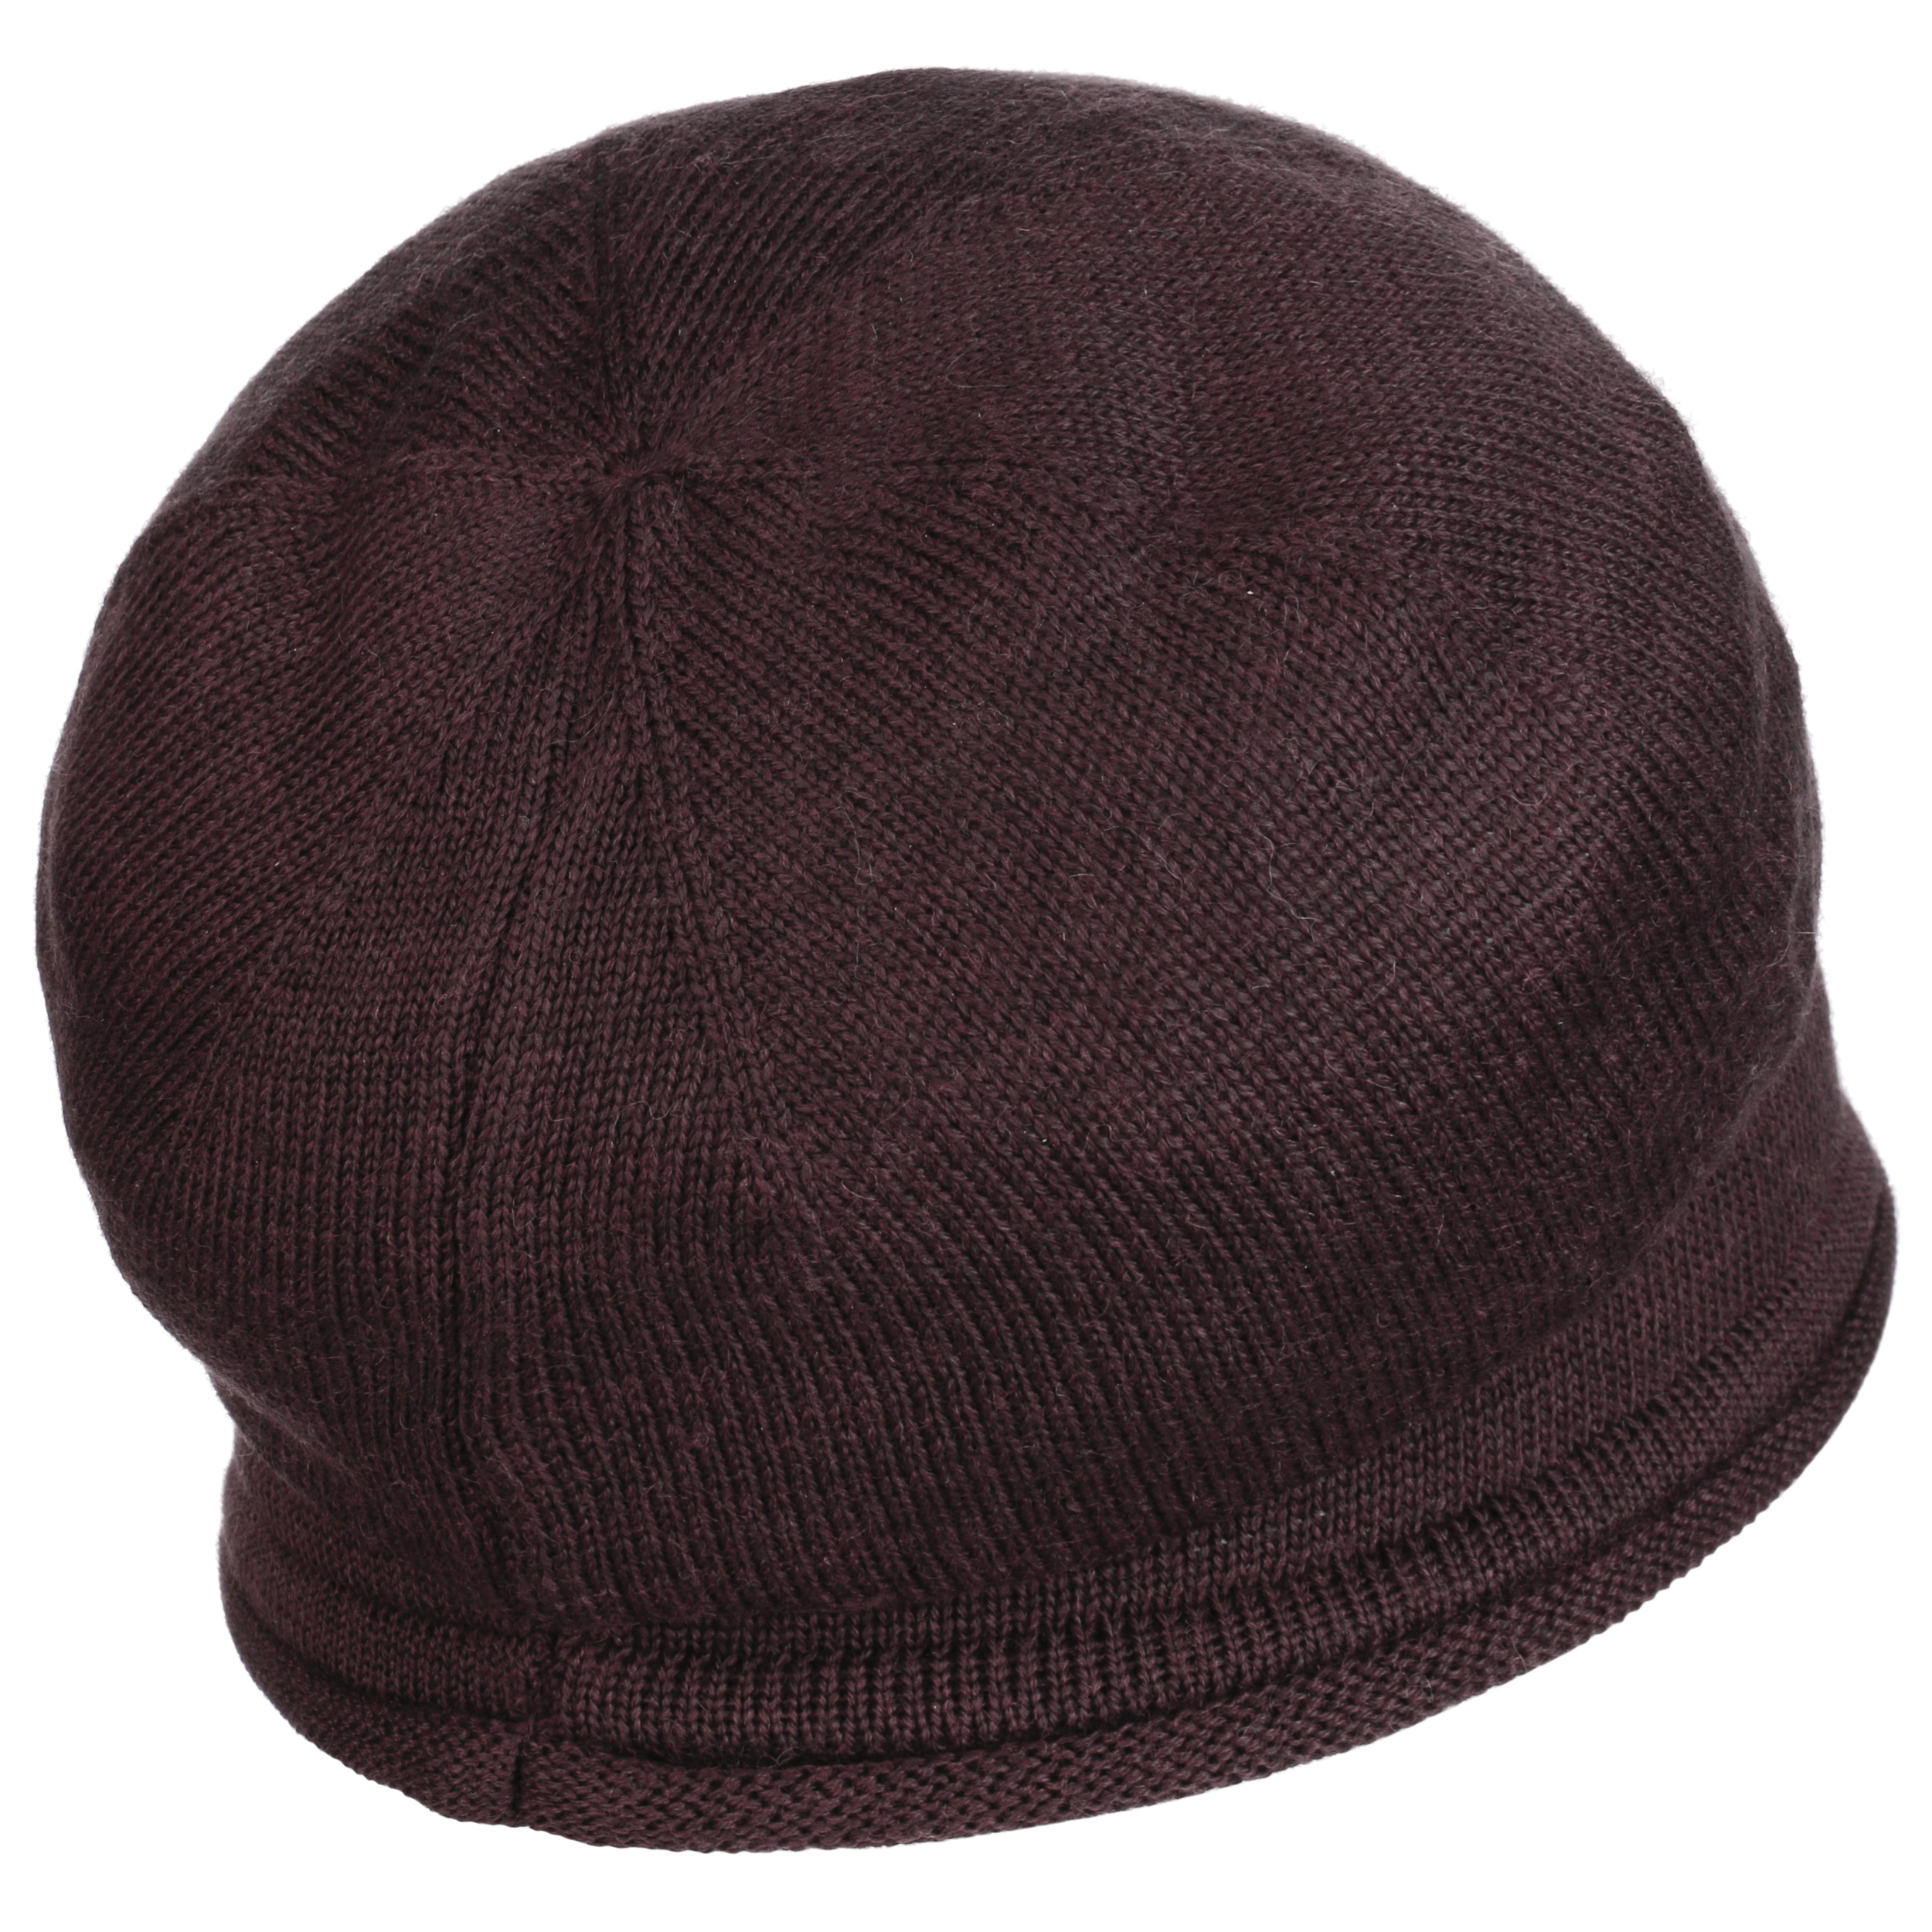 29,95 € - Leicester Beanie Chillouts by Oversize